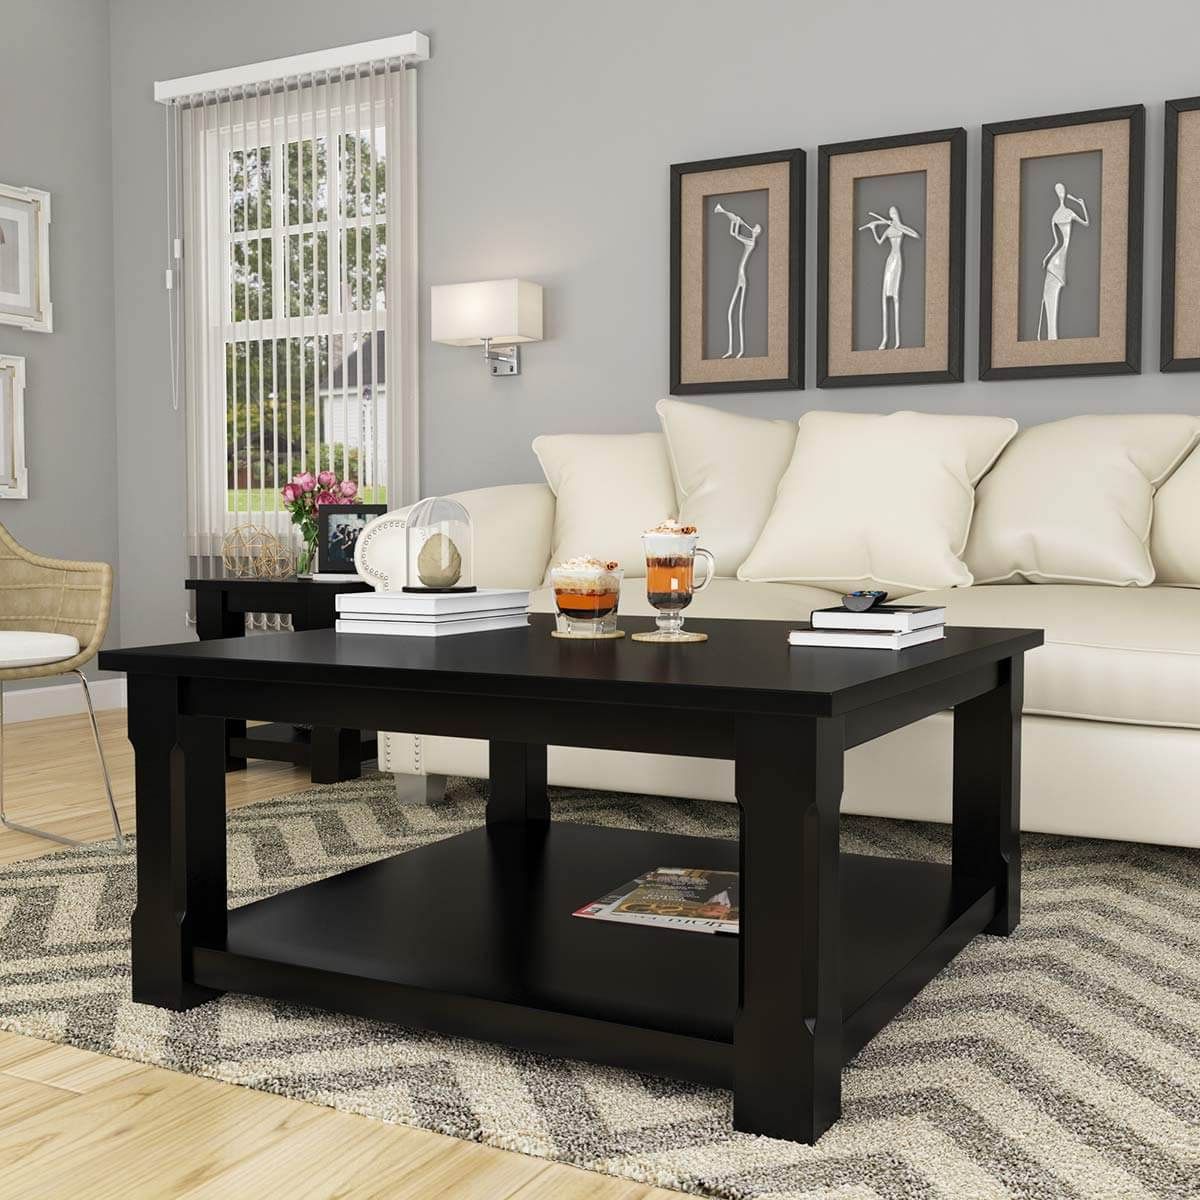 Favorite Black Wood Square Coffee Table – Brimson Contemporary Style Solid Wood Within Wood Coffee Tables With 2 Tier Storage (Photo 10 of 15)